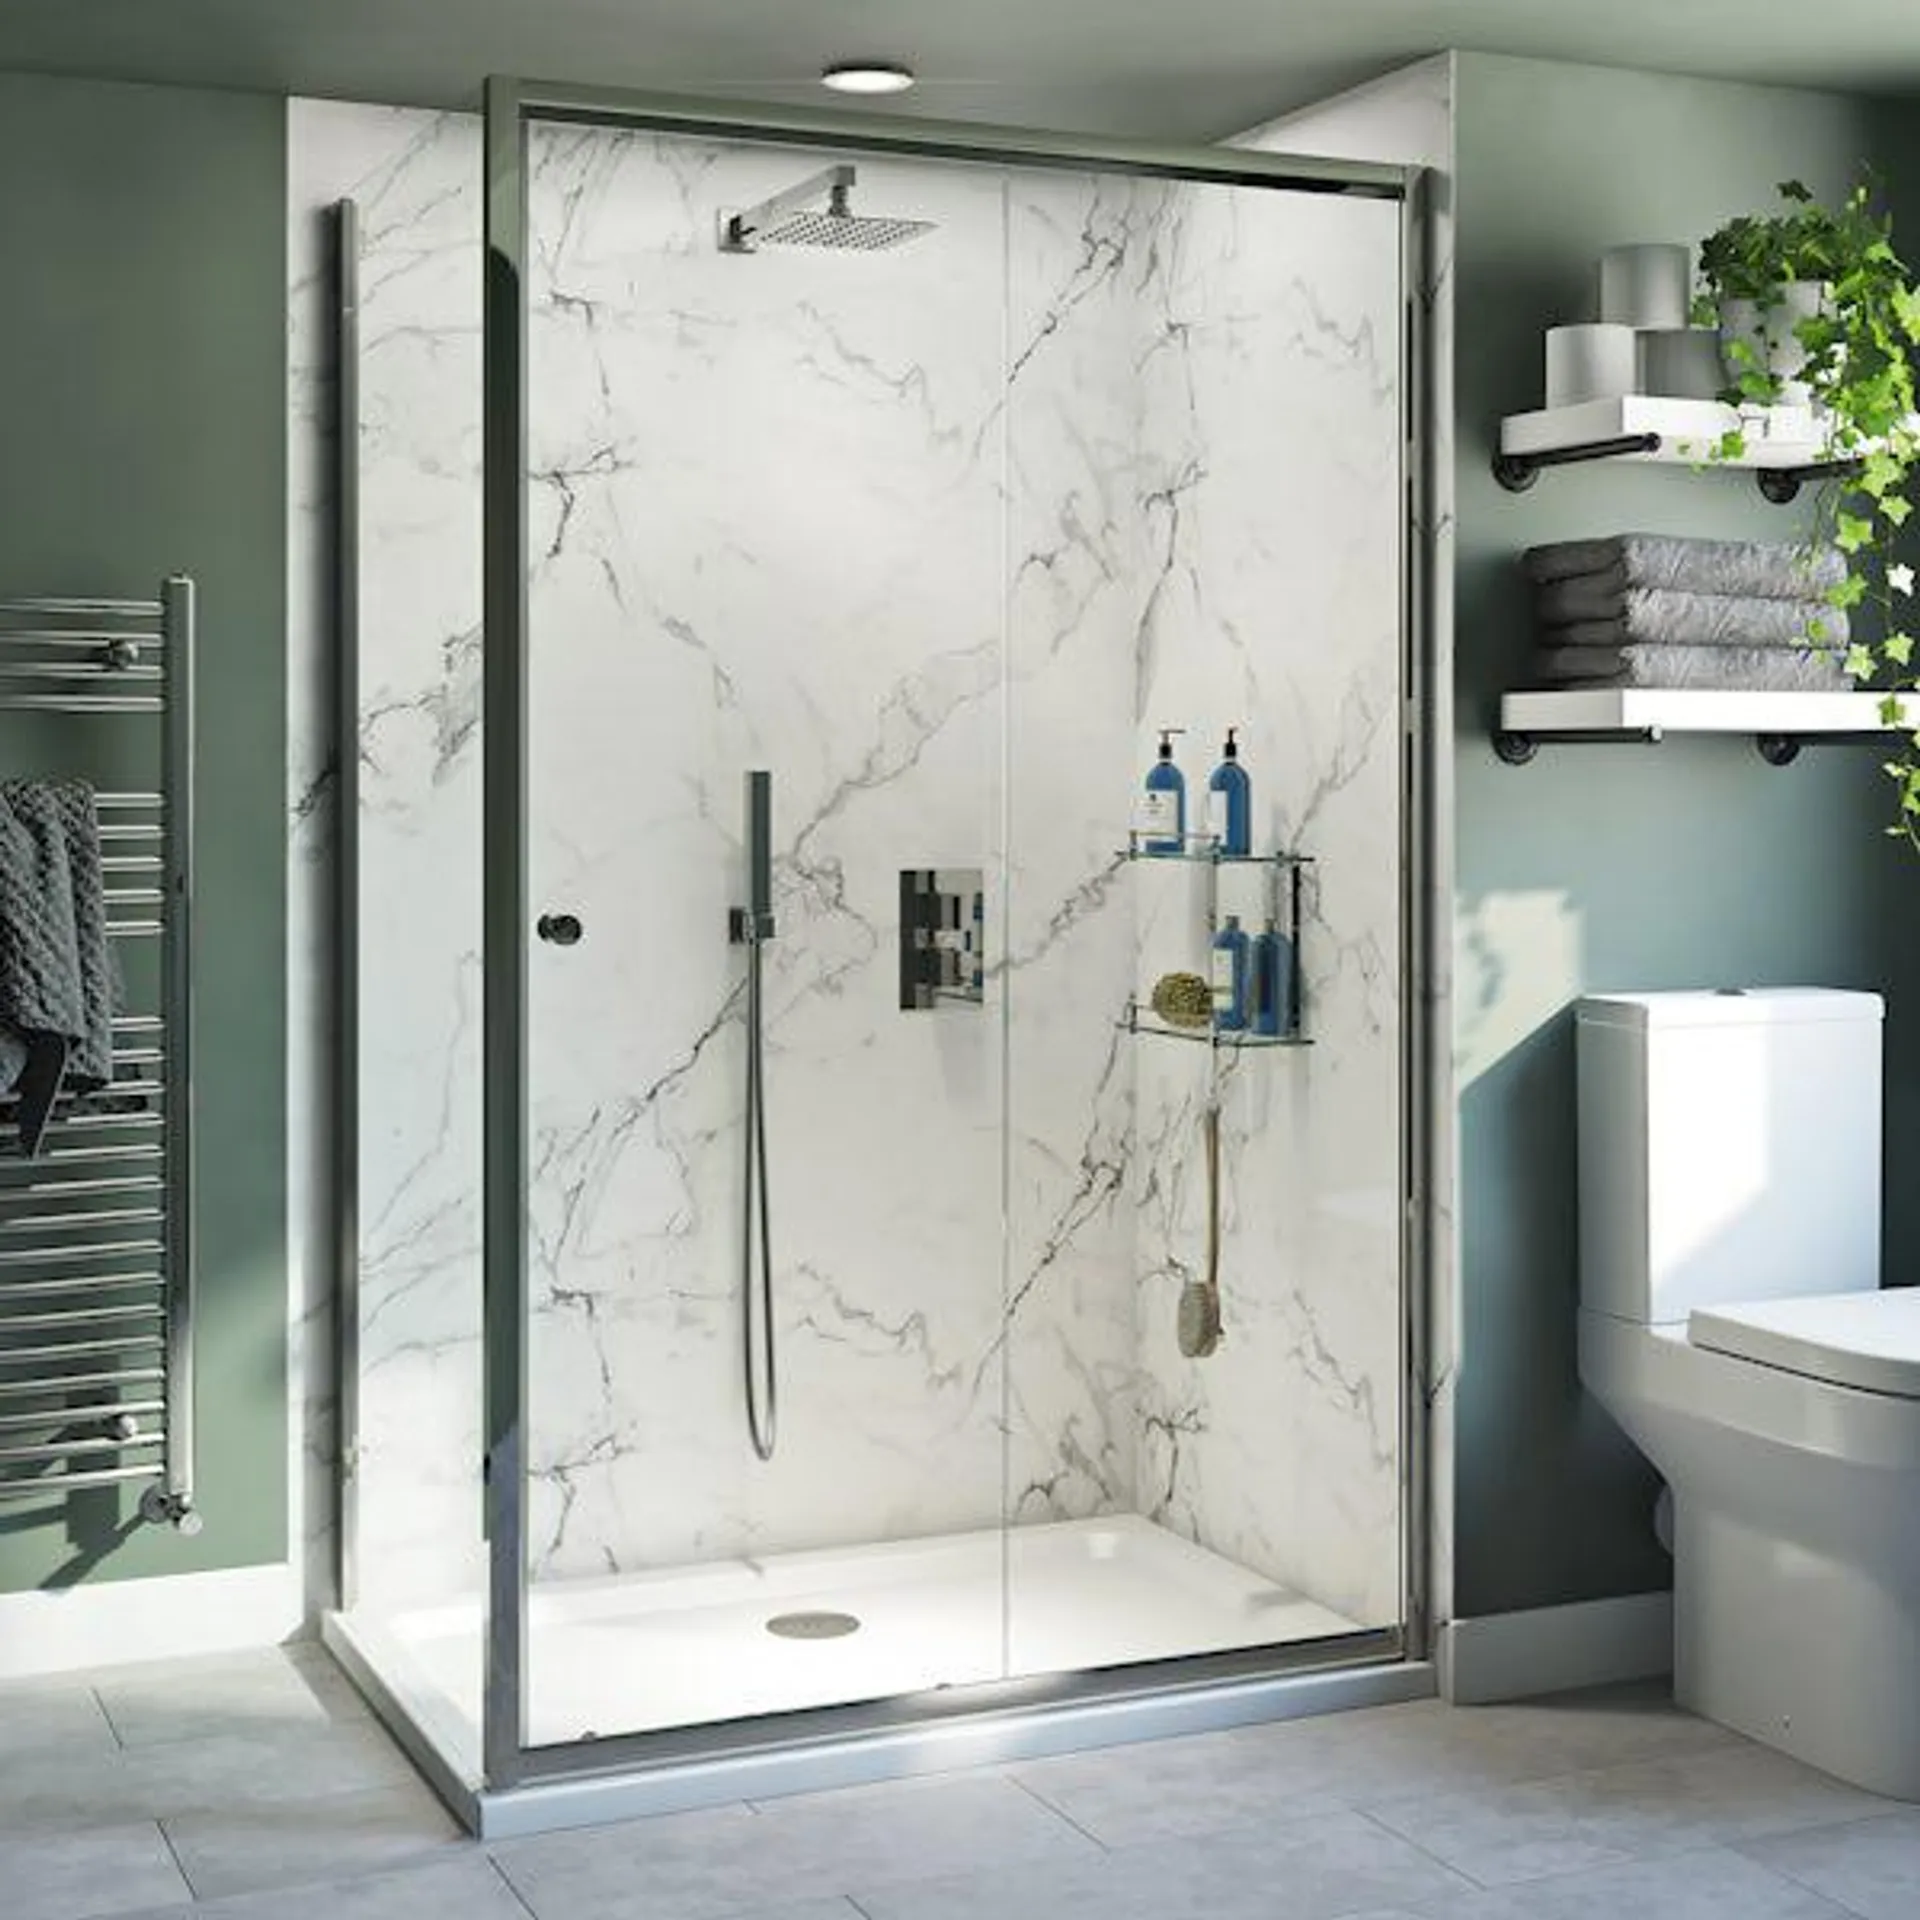 Clarity shower enclosure with shower tray